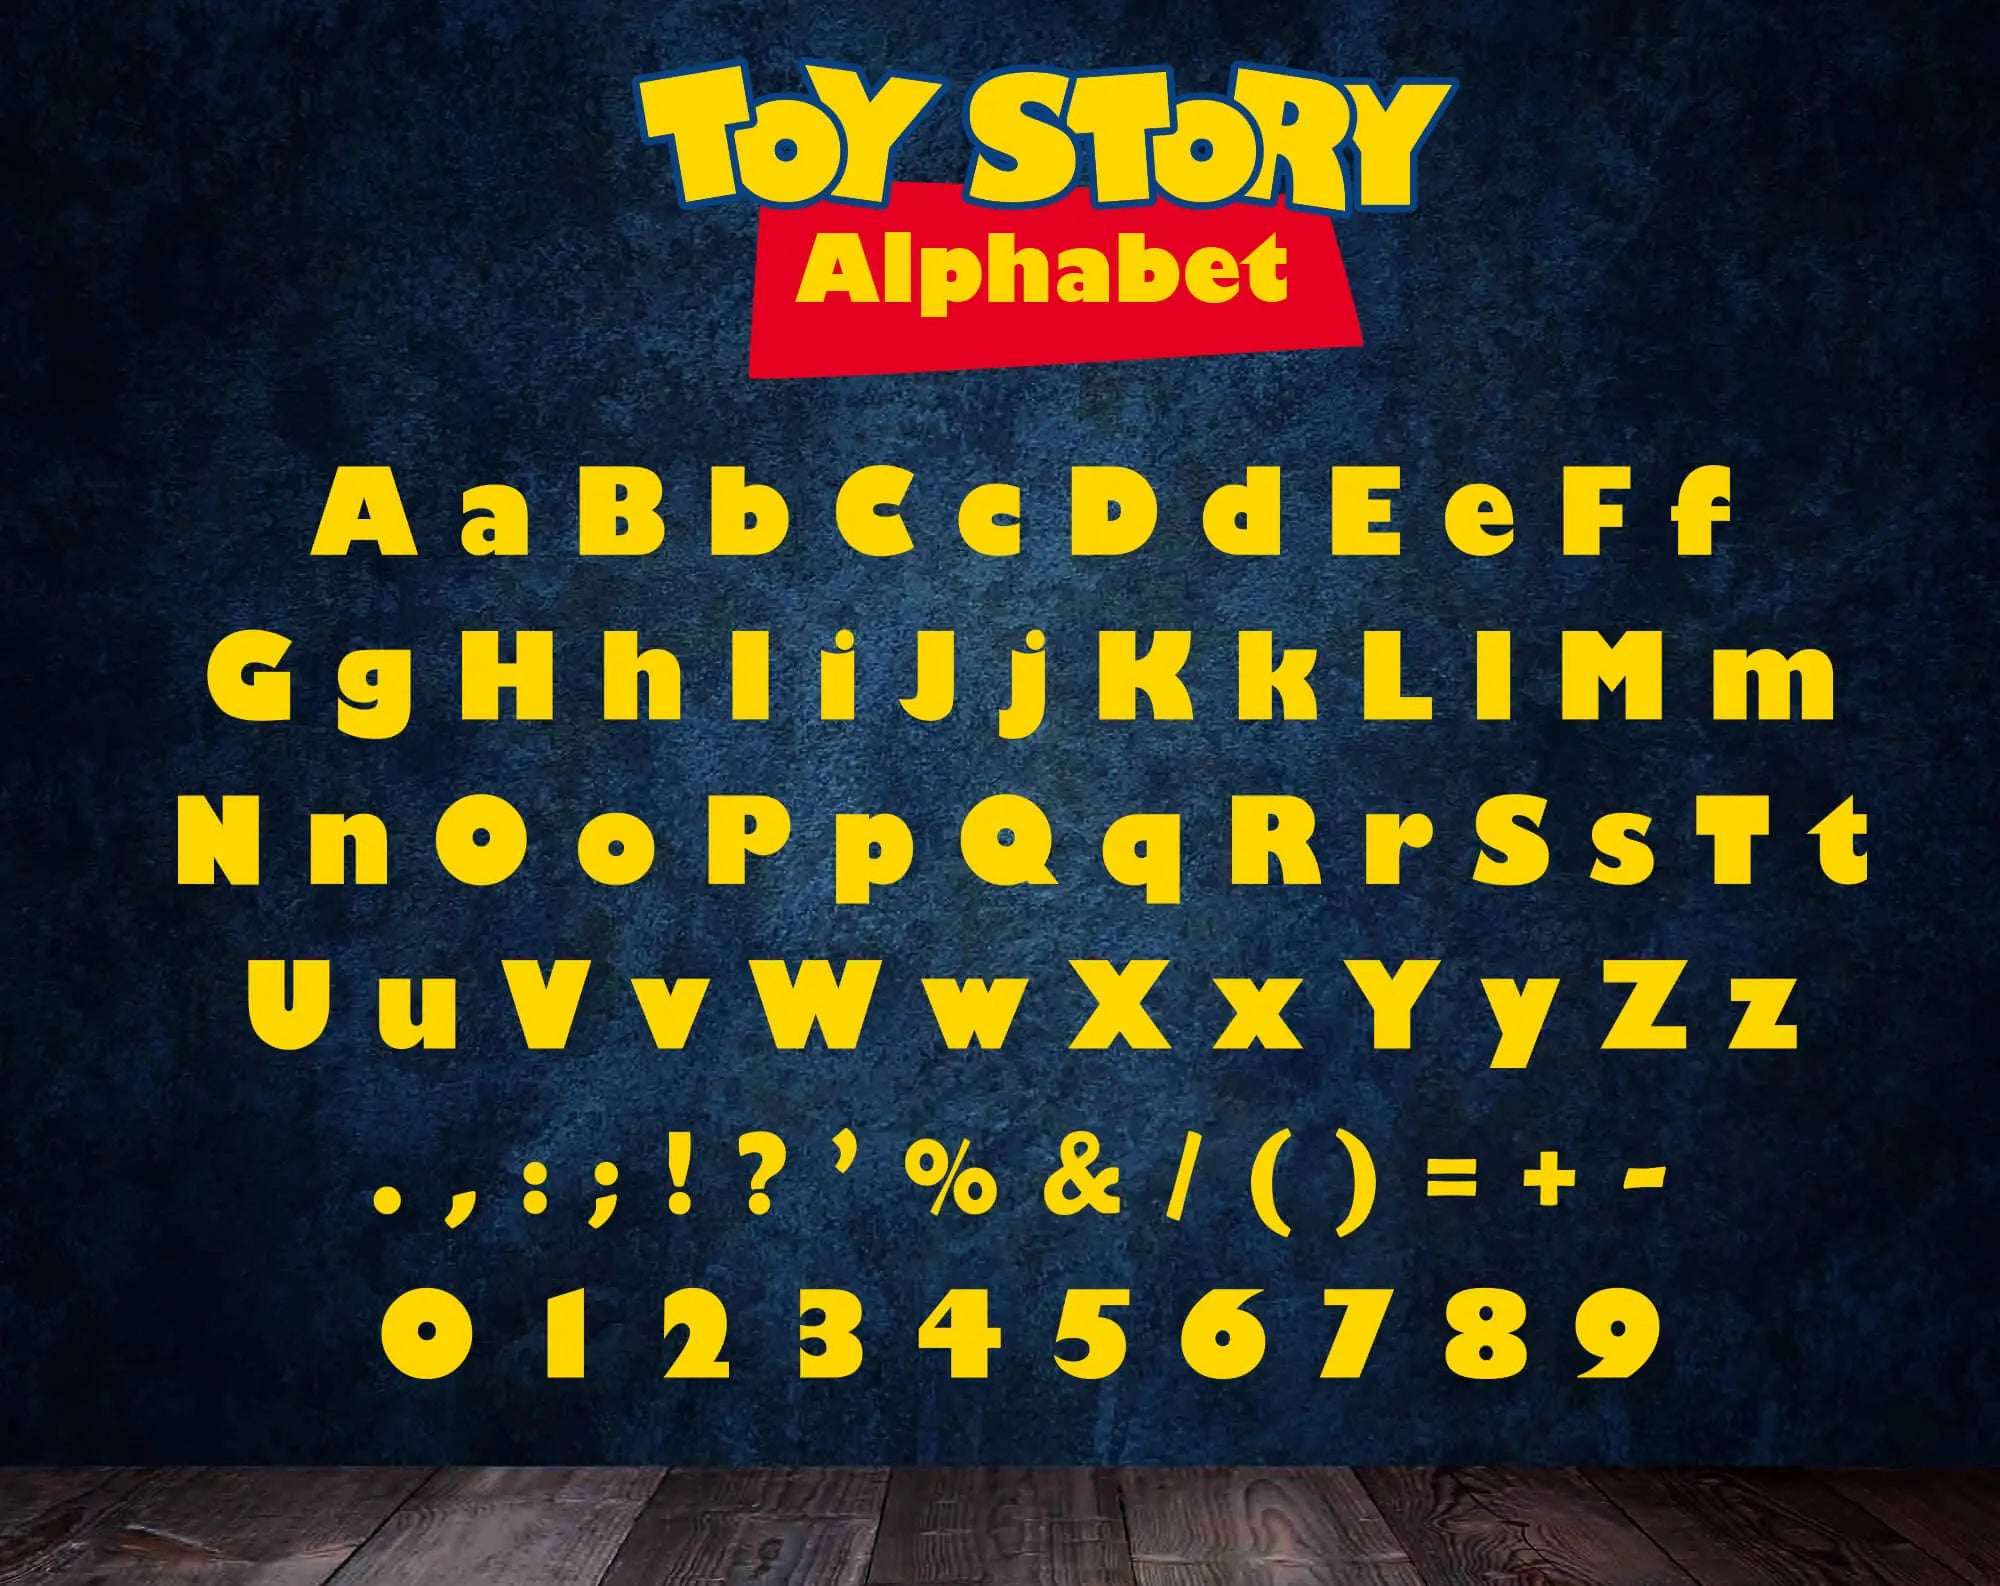 toy-story-font-svg-toy-story-alphabet-toy-story-numbers-toy-story